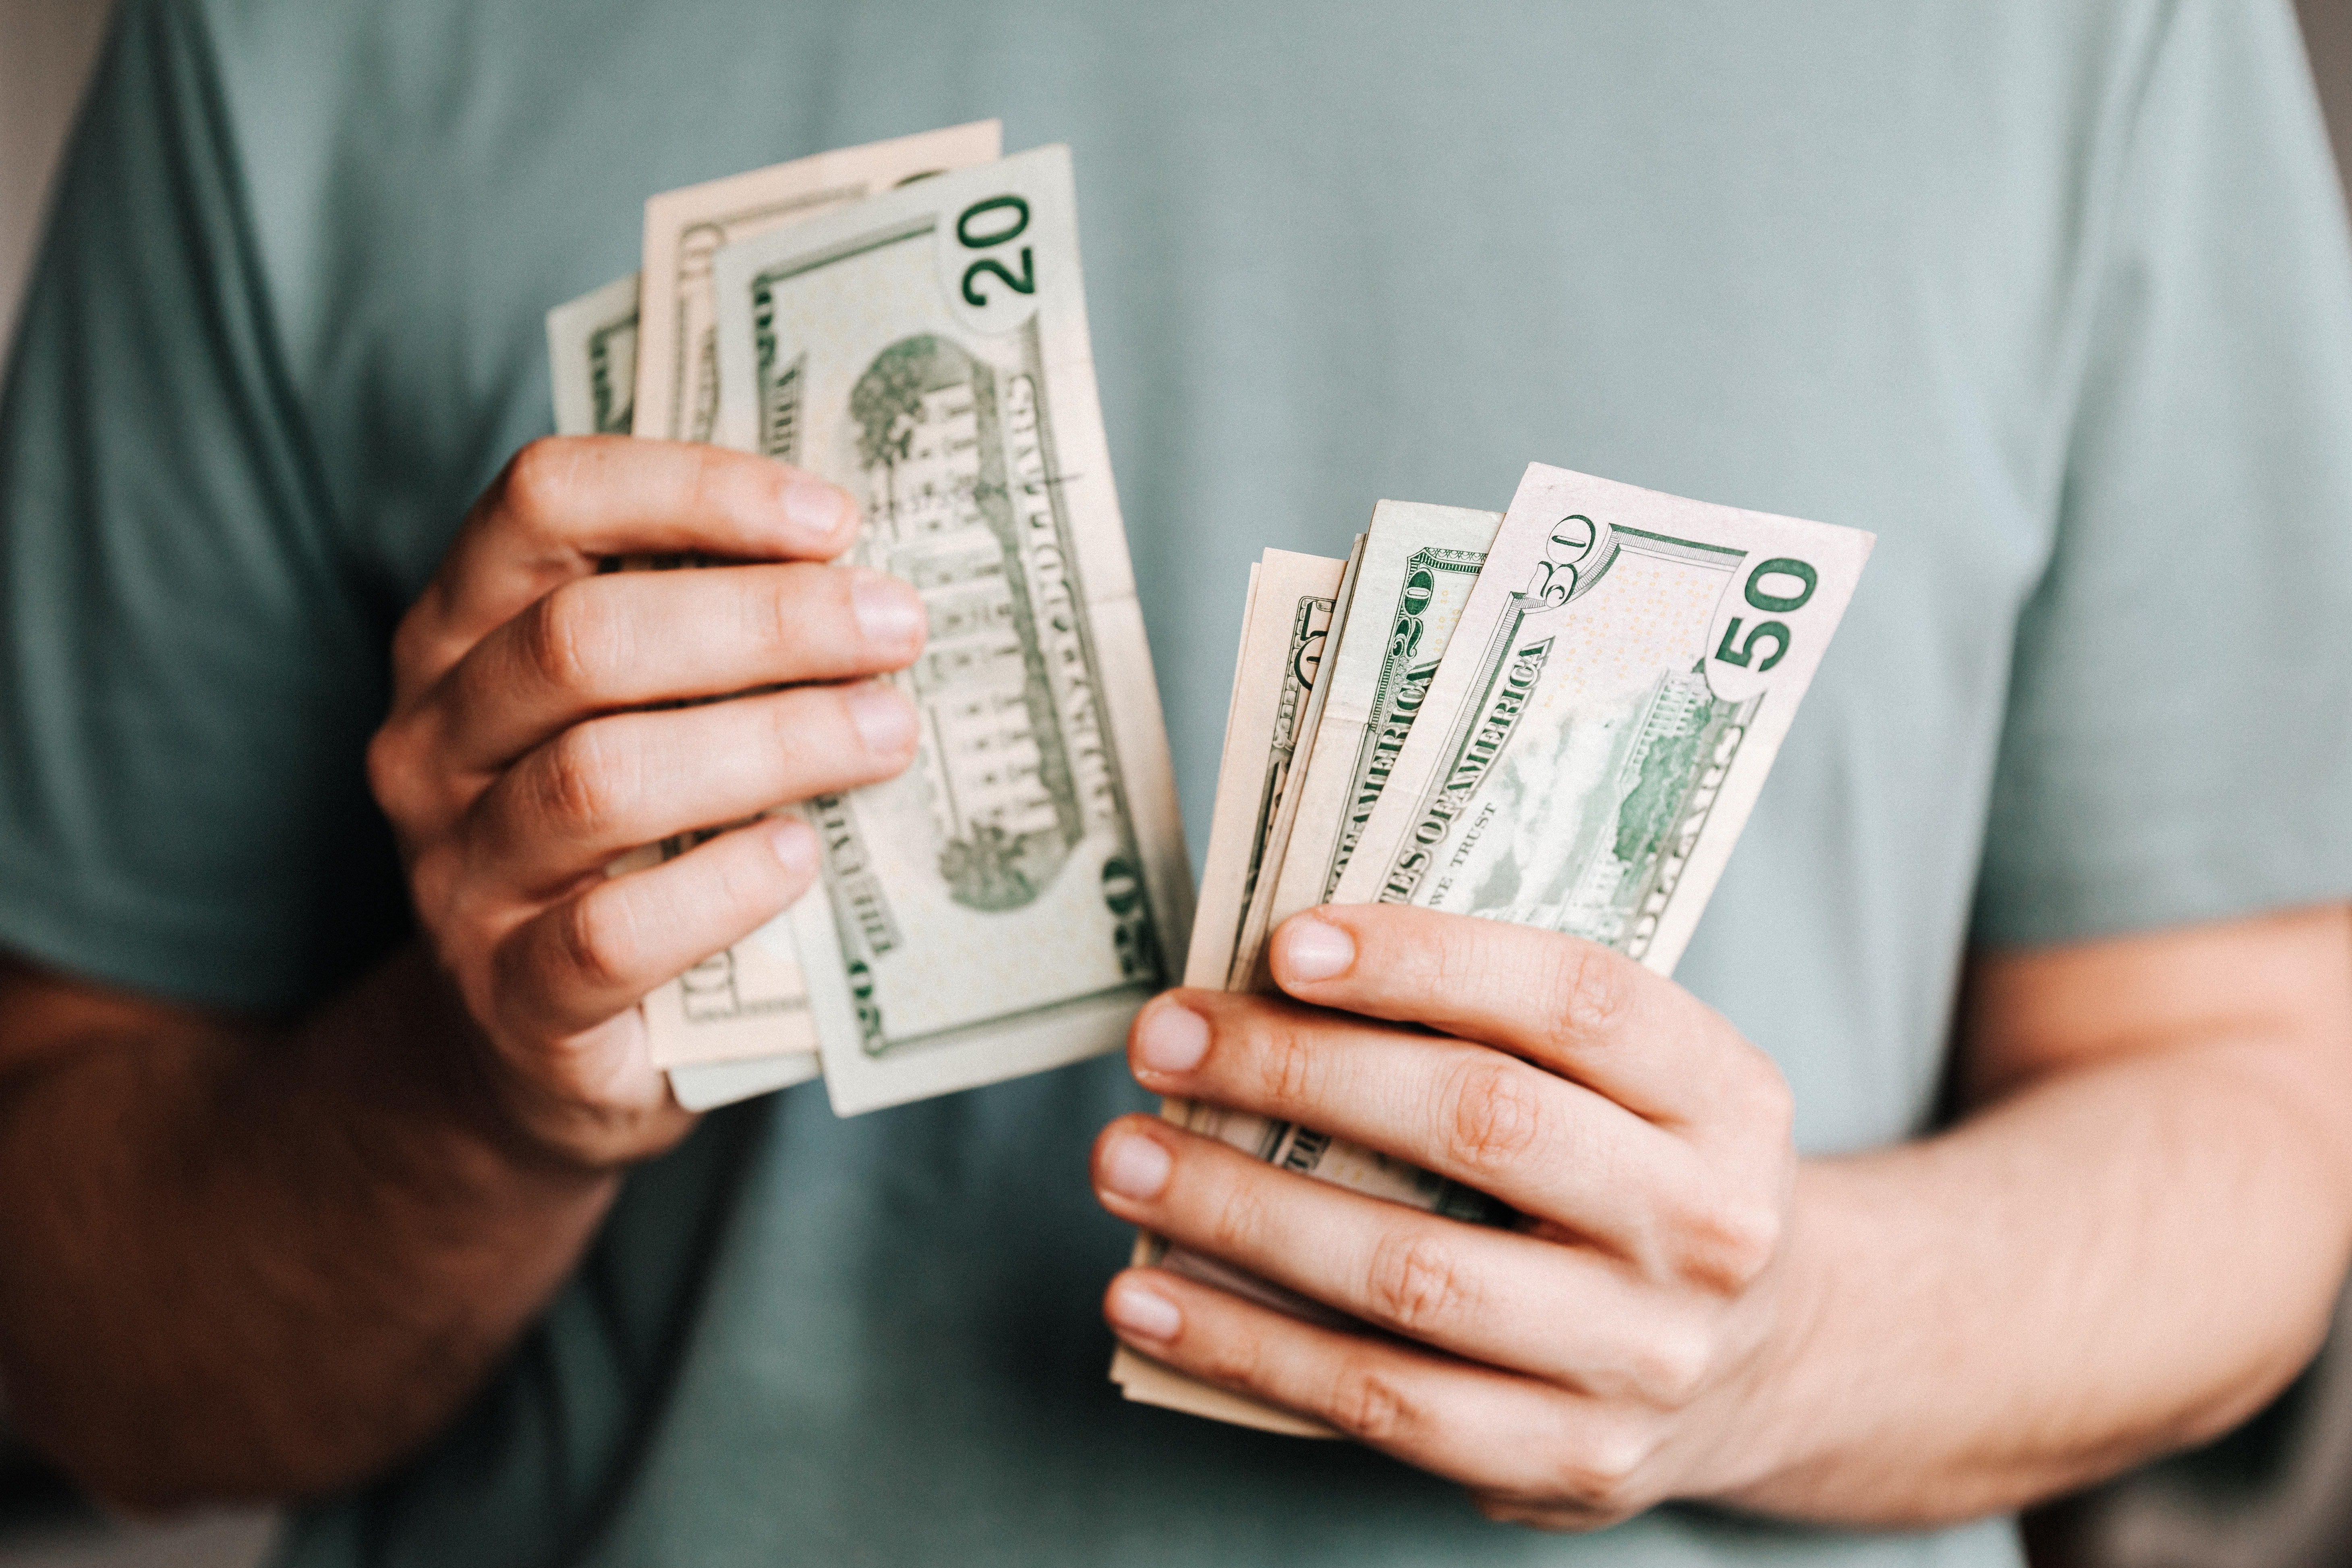 The guy kept the $60K he got from his late uncle under wraps. | Source: Pexels